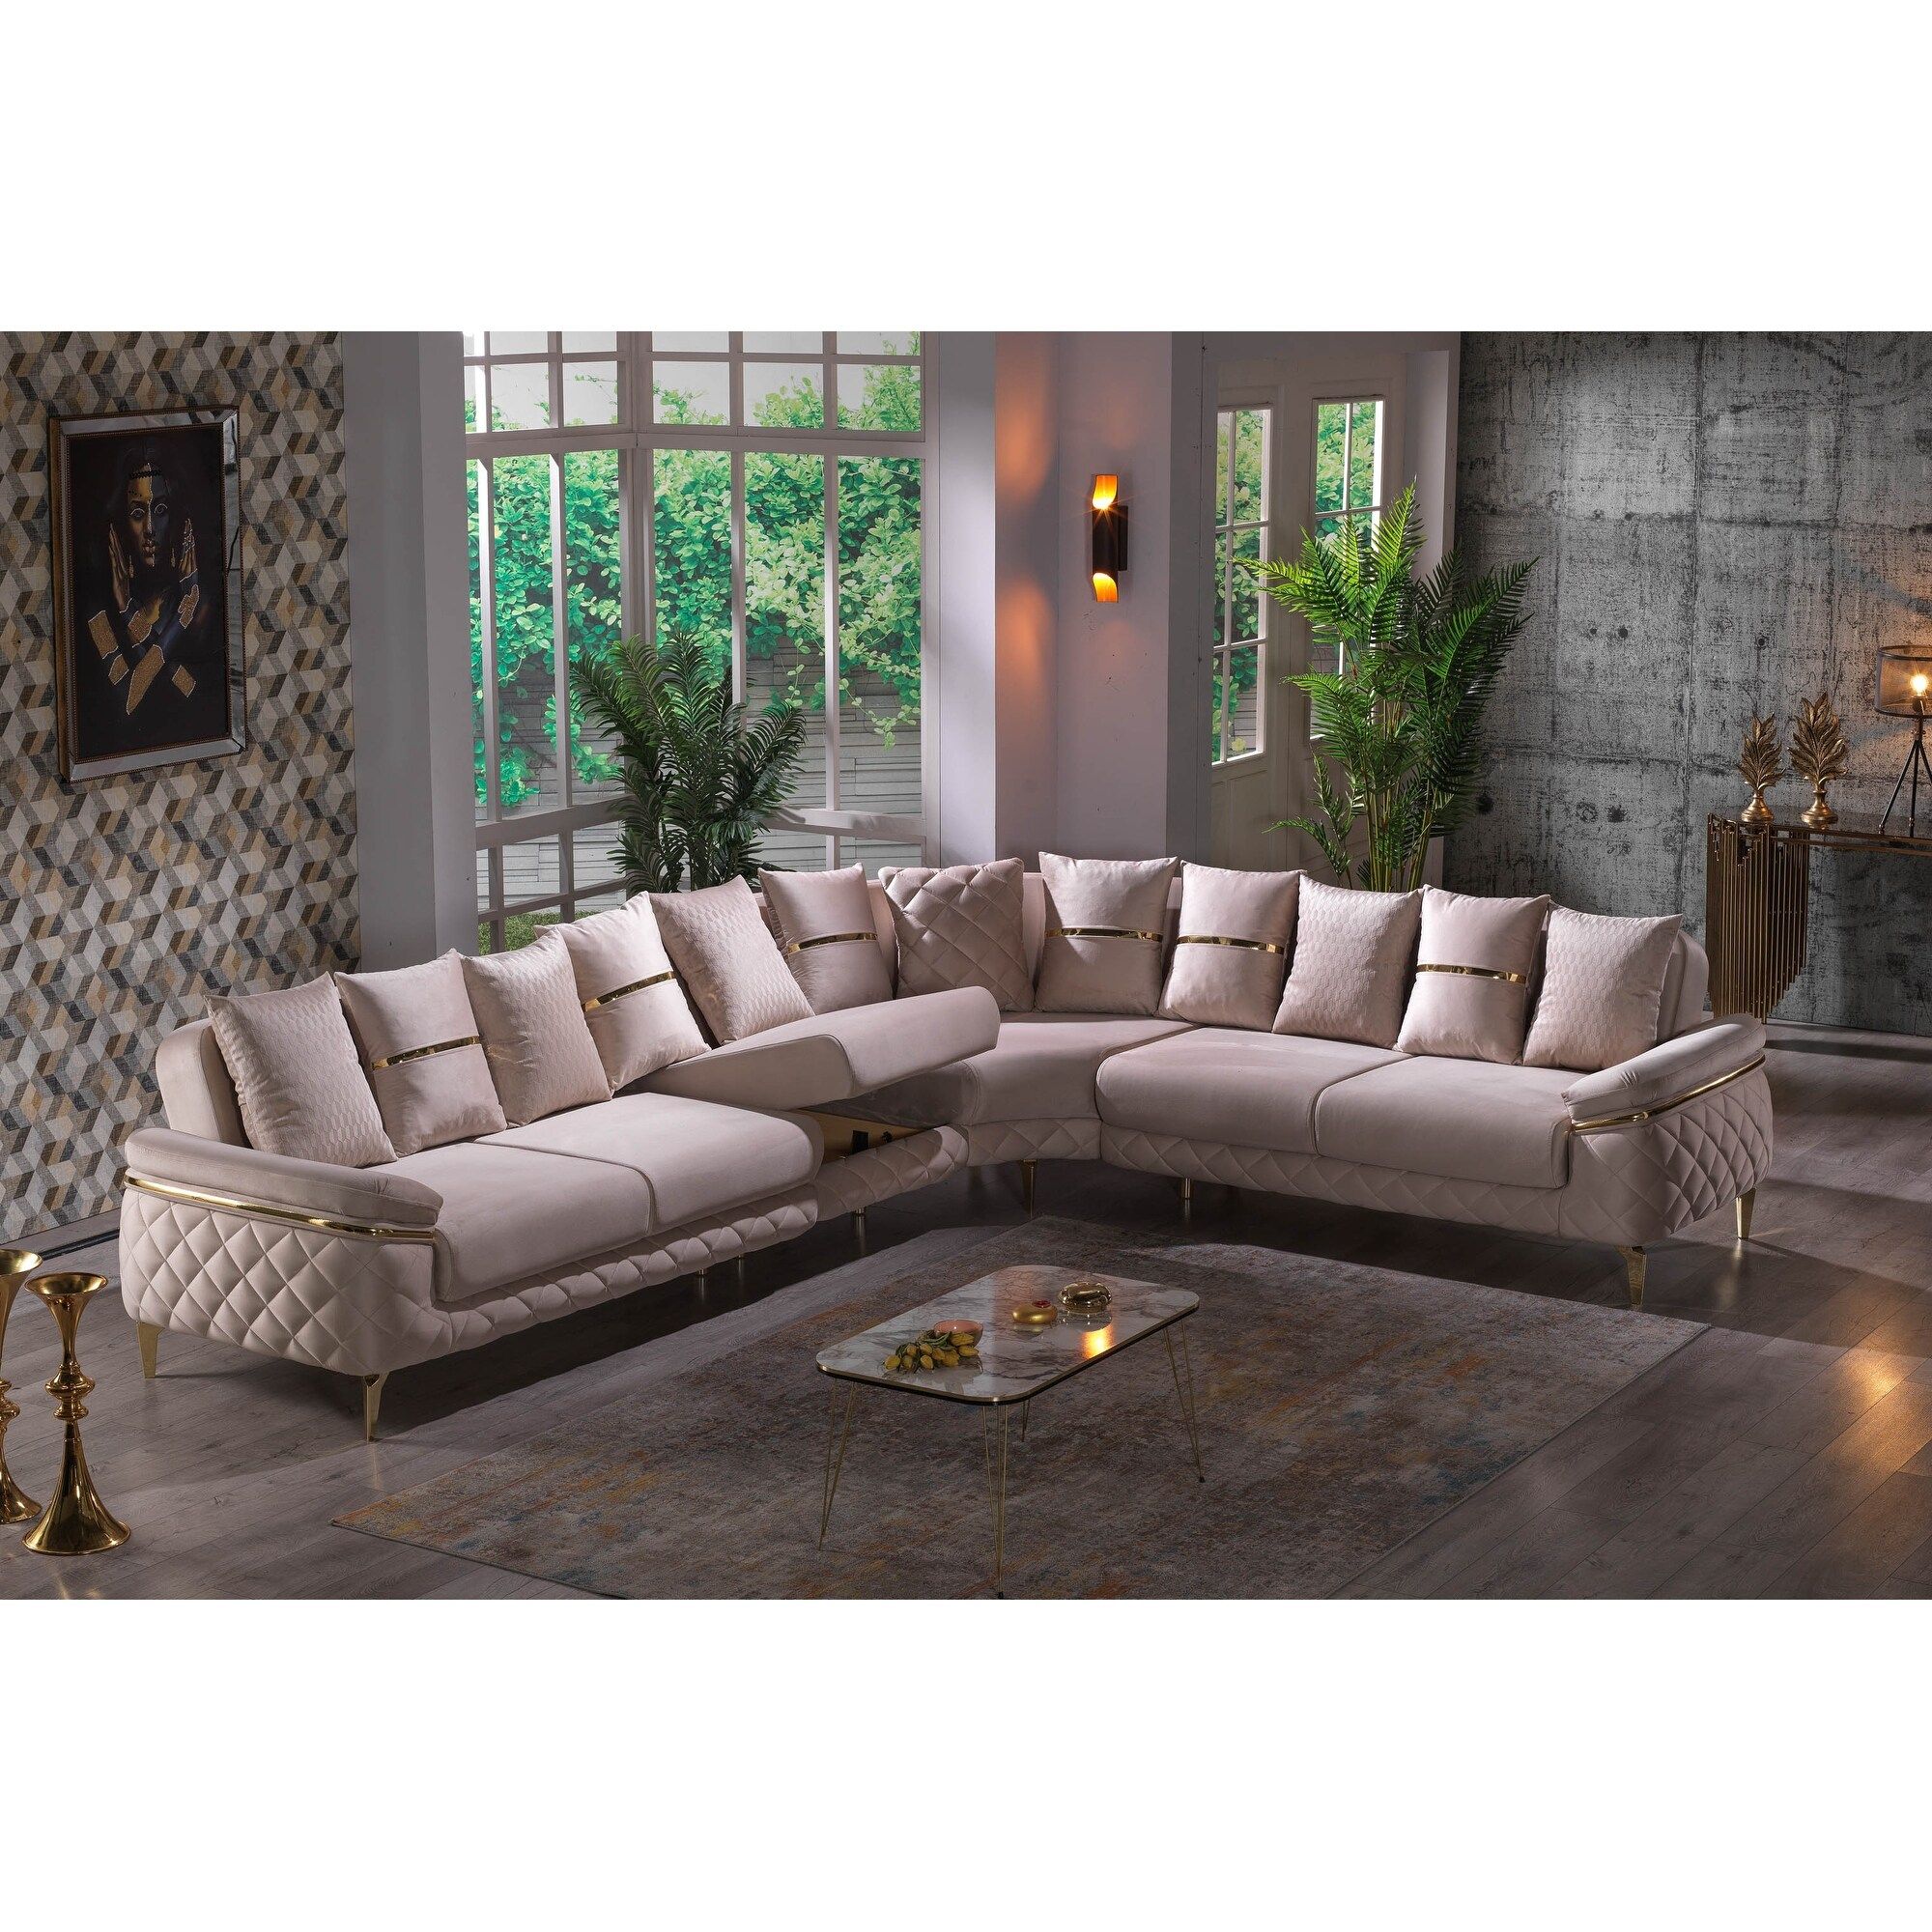 Mondi 127" Wide, Square Arm And Pillow Back Sectional Sofa – – 37027513 For Pillowback Sofa Sectionals (View 5 of 15)